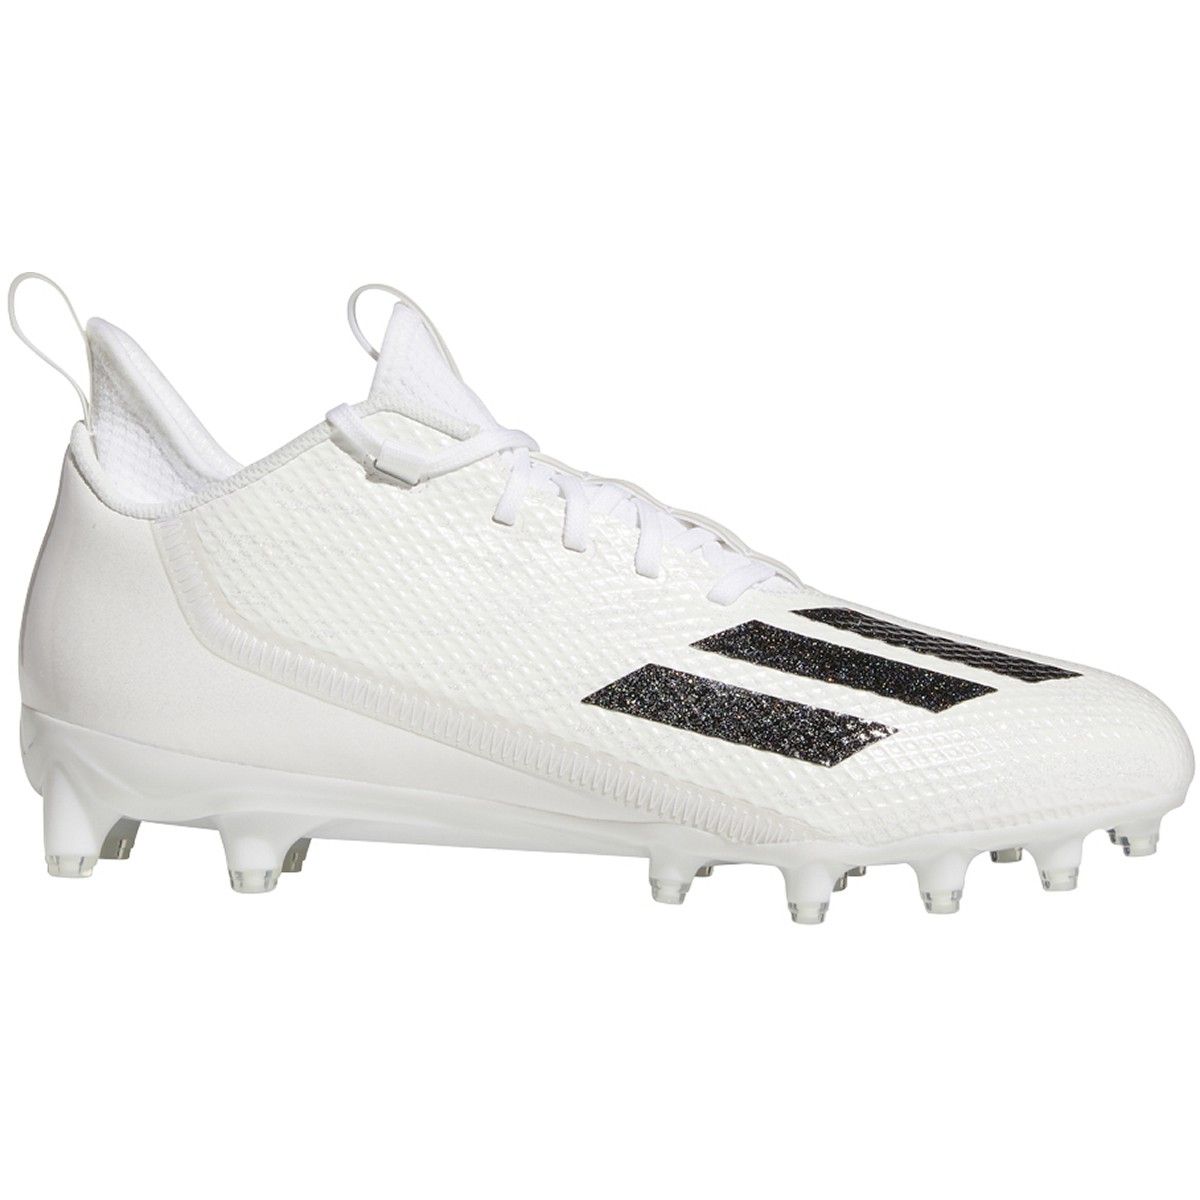 Adidas Football Cleats All White